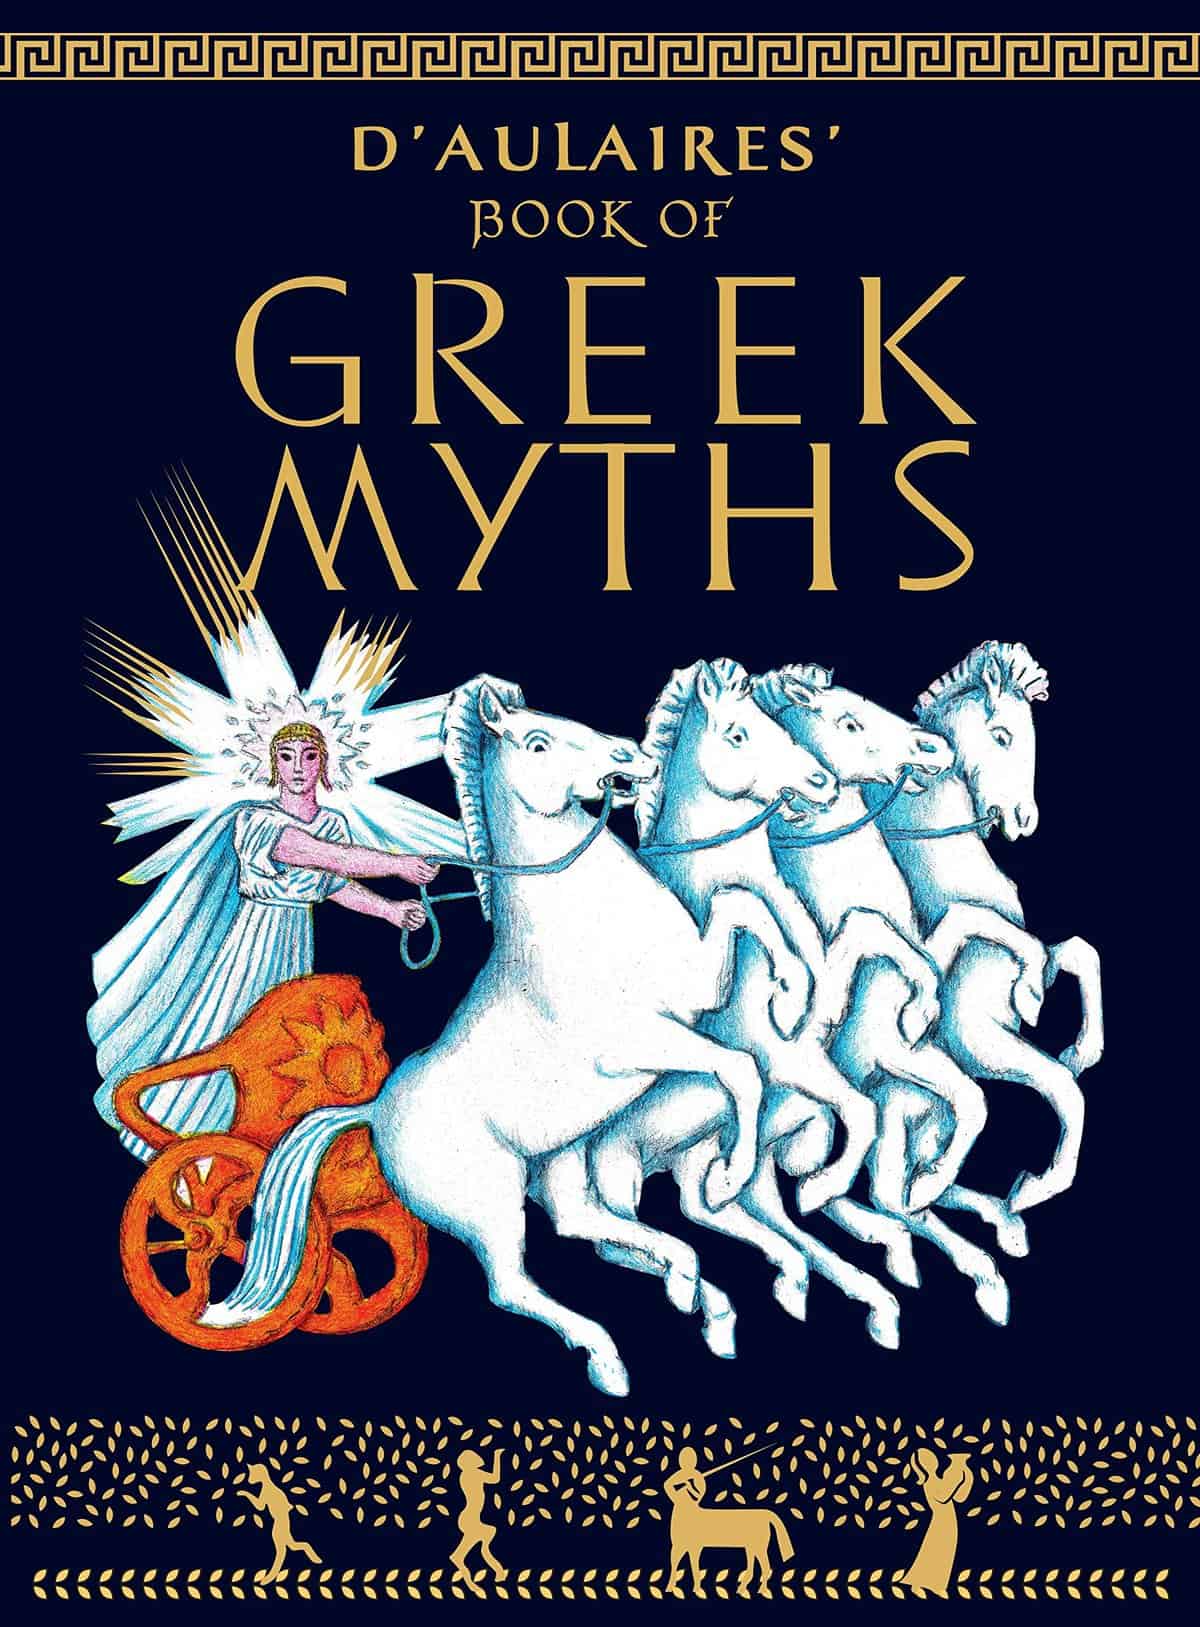 D’Aulaire’s Book of Greek Myths